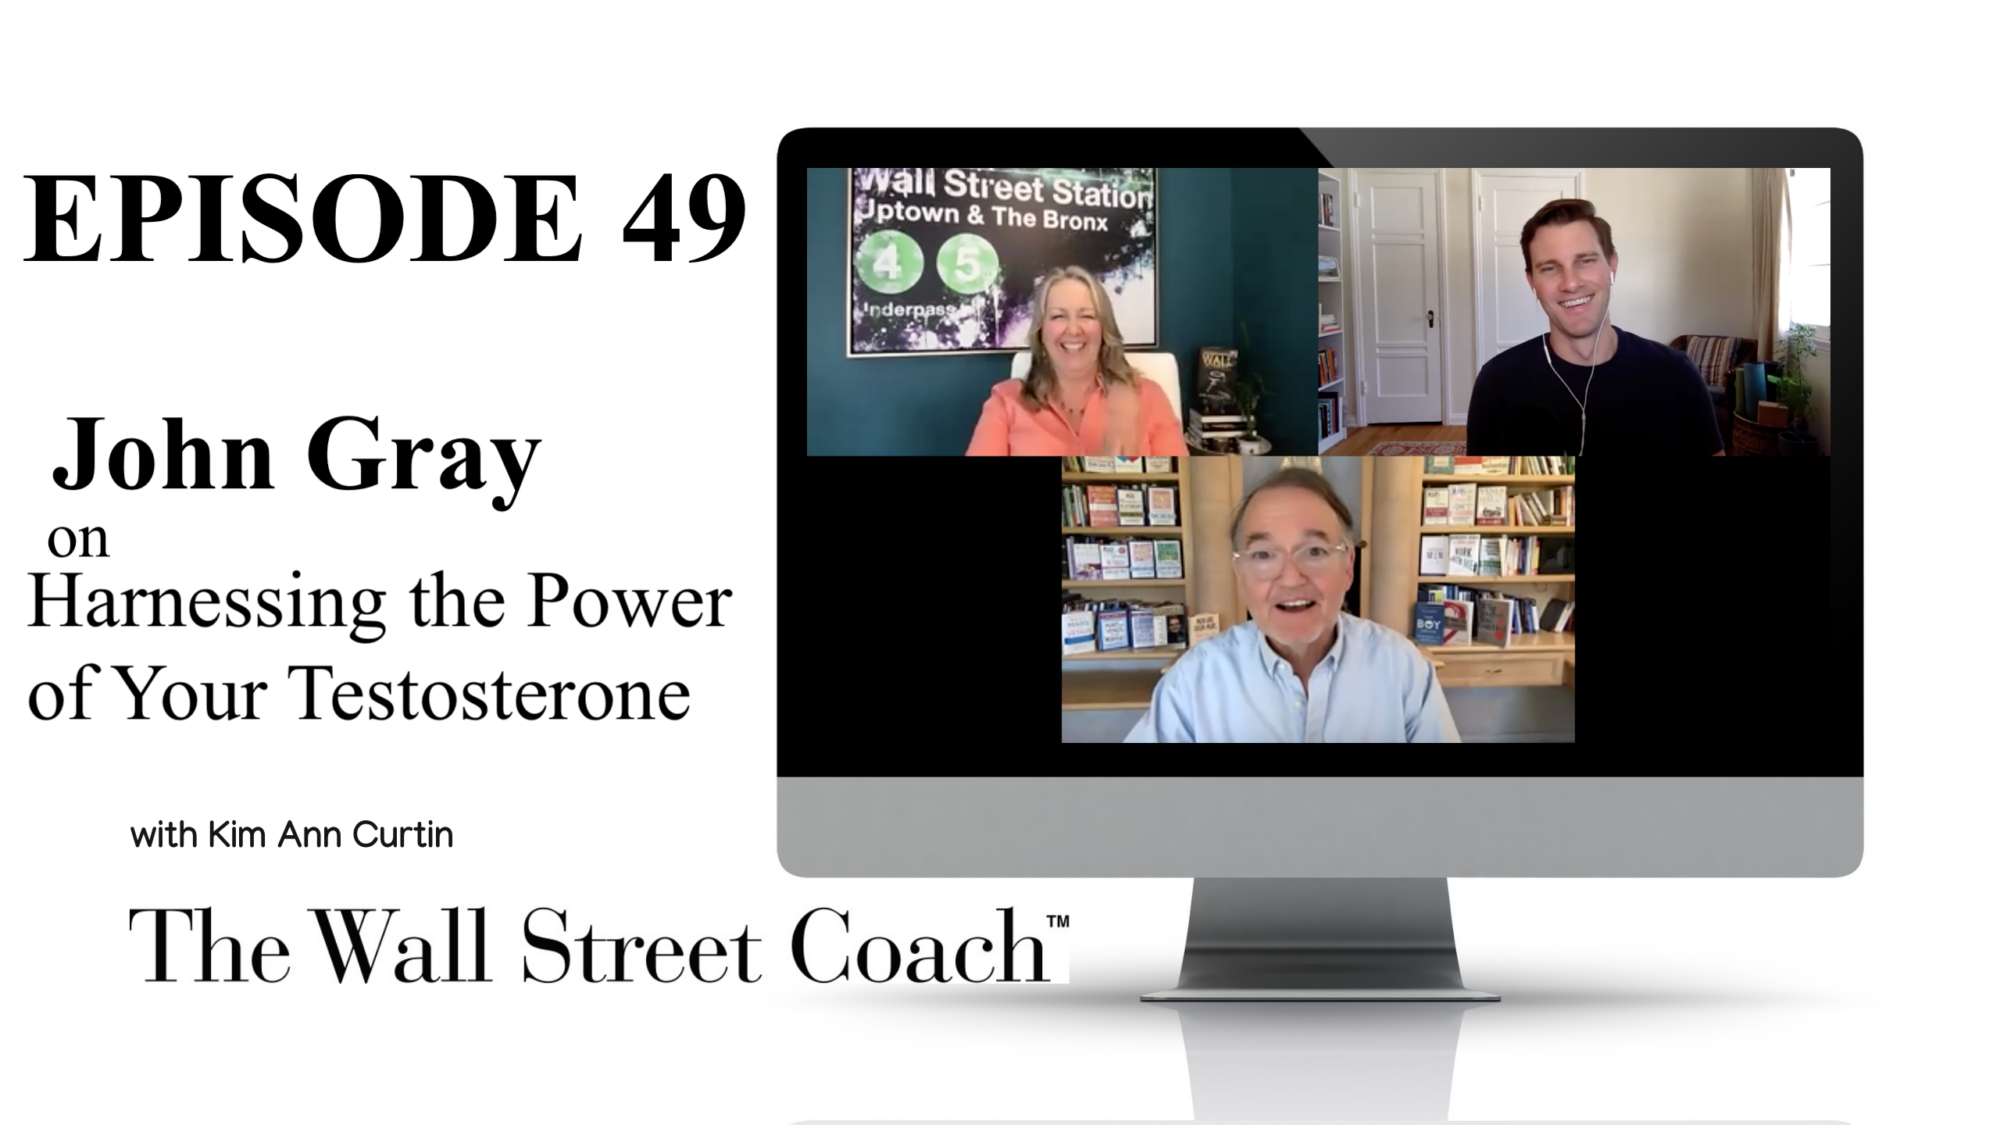 Episode 49: John Gray, PhD. on Harnessing the Power of Your Testosterone